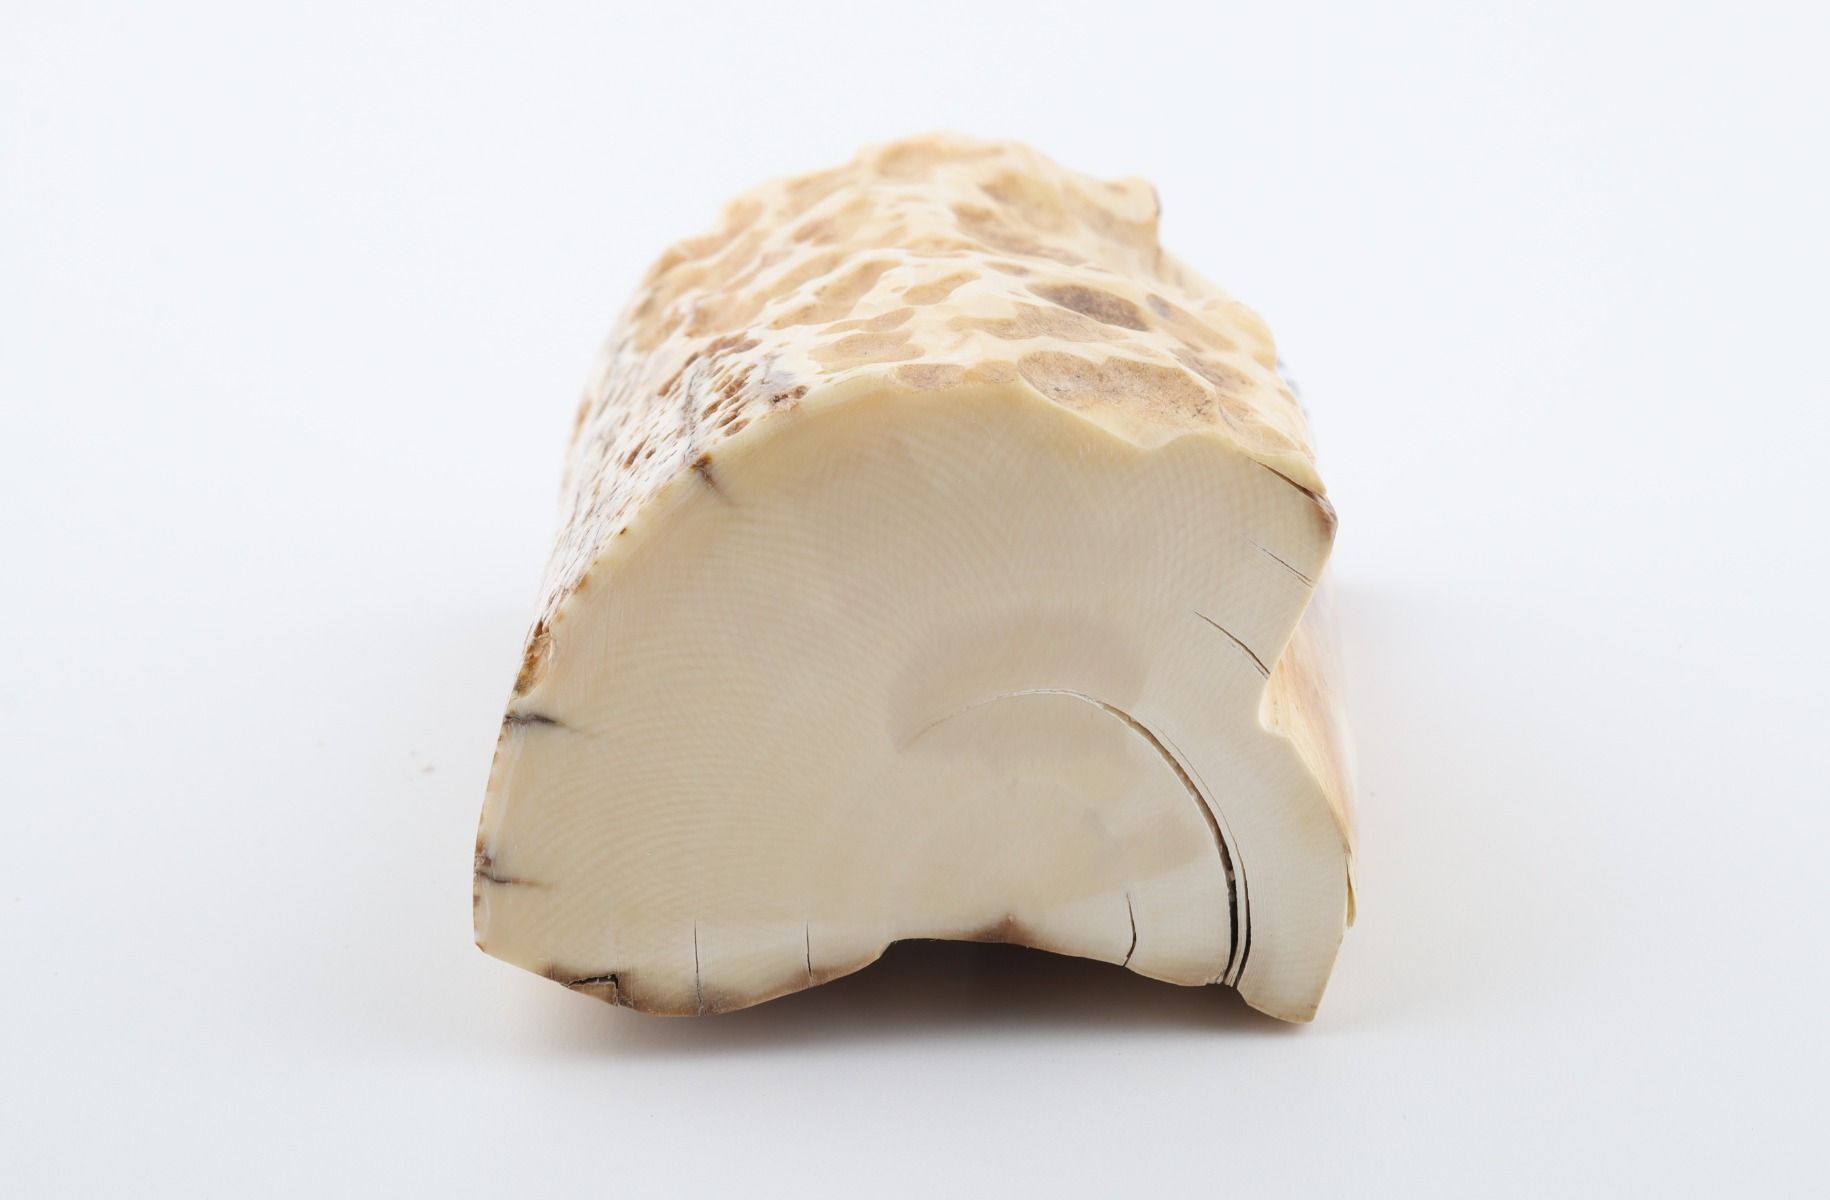 Natural mammoth ivory piece